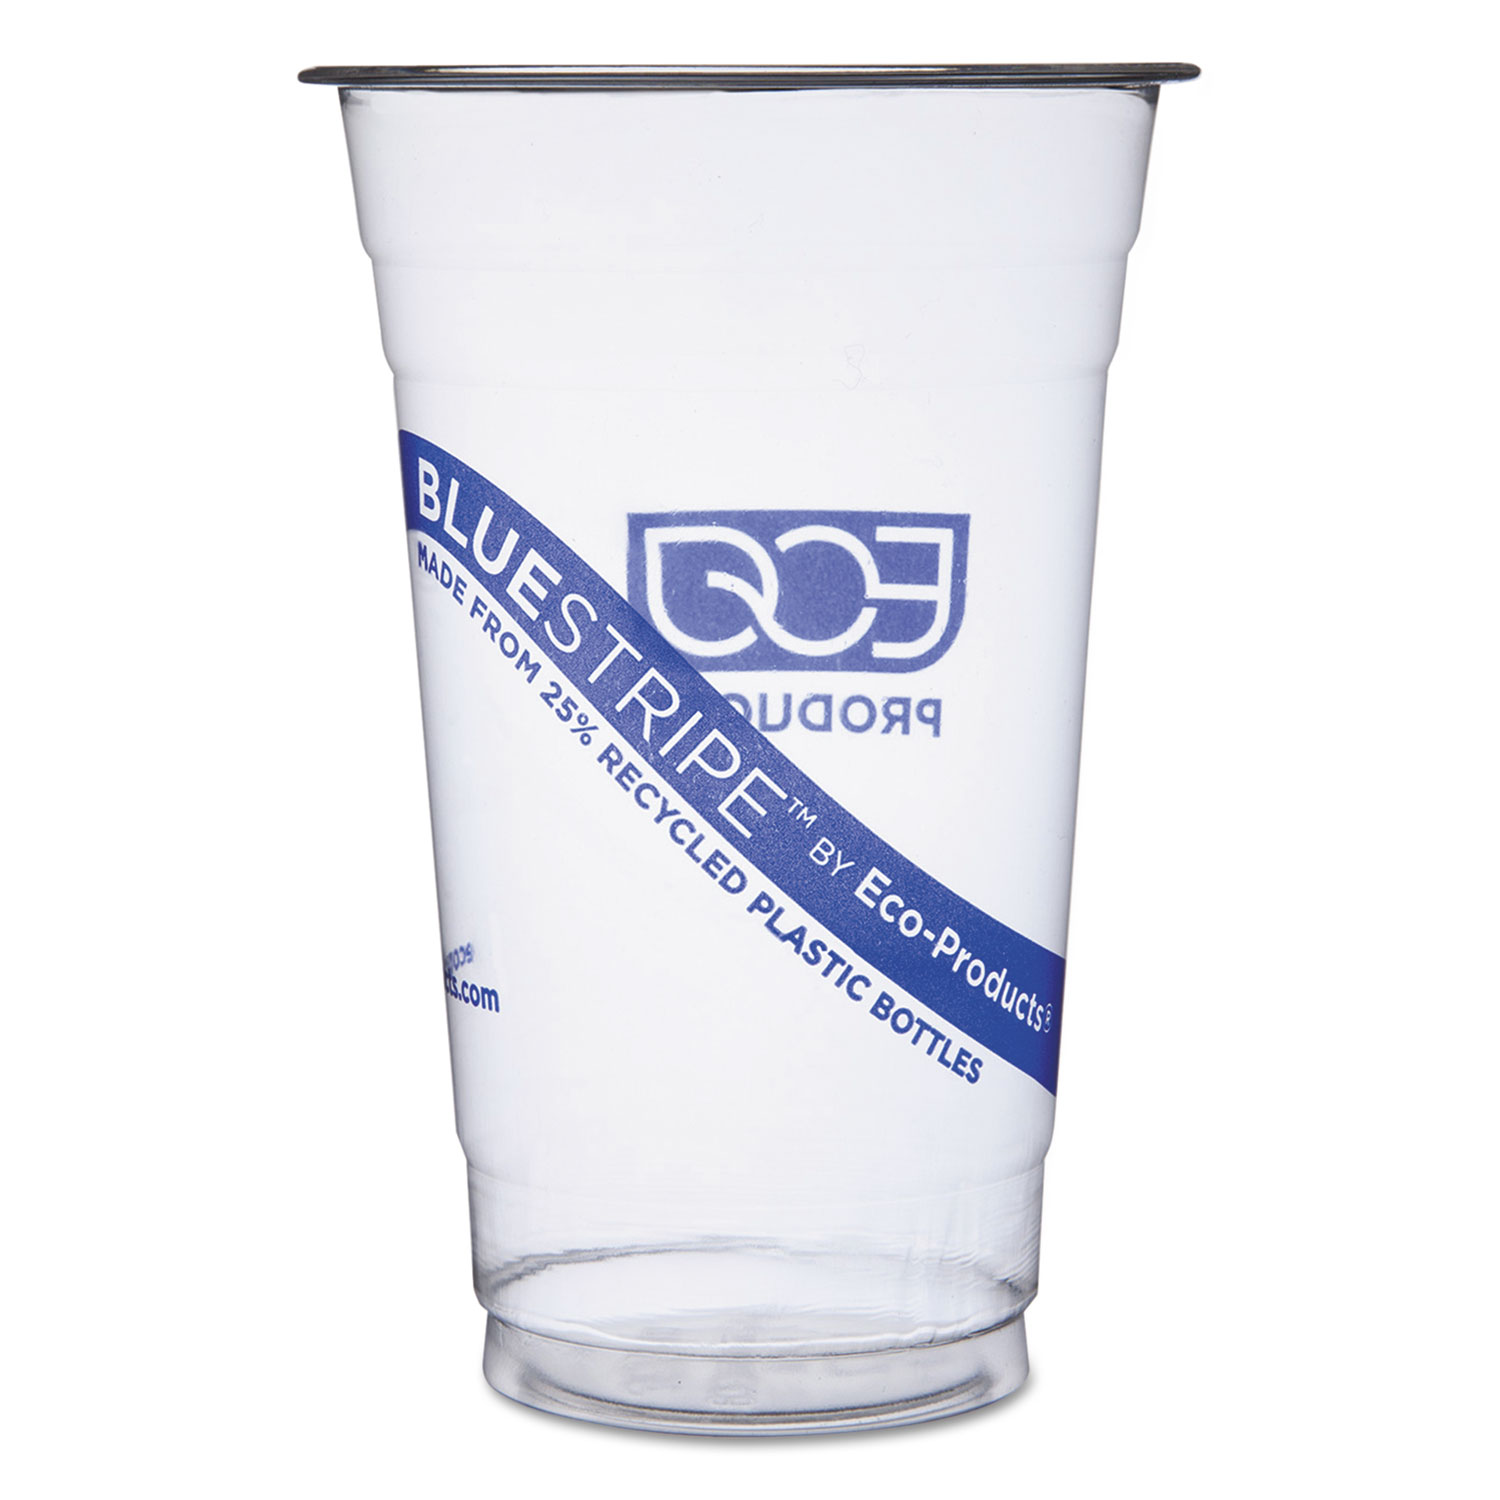  Eco-Products EP-CR20 BlueStripe 25% Recycled Content Cold Cups, 20 oz, Clear/Blue, 1000/Carton (ECOEPCR20) 